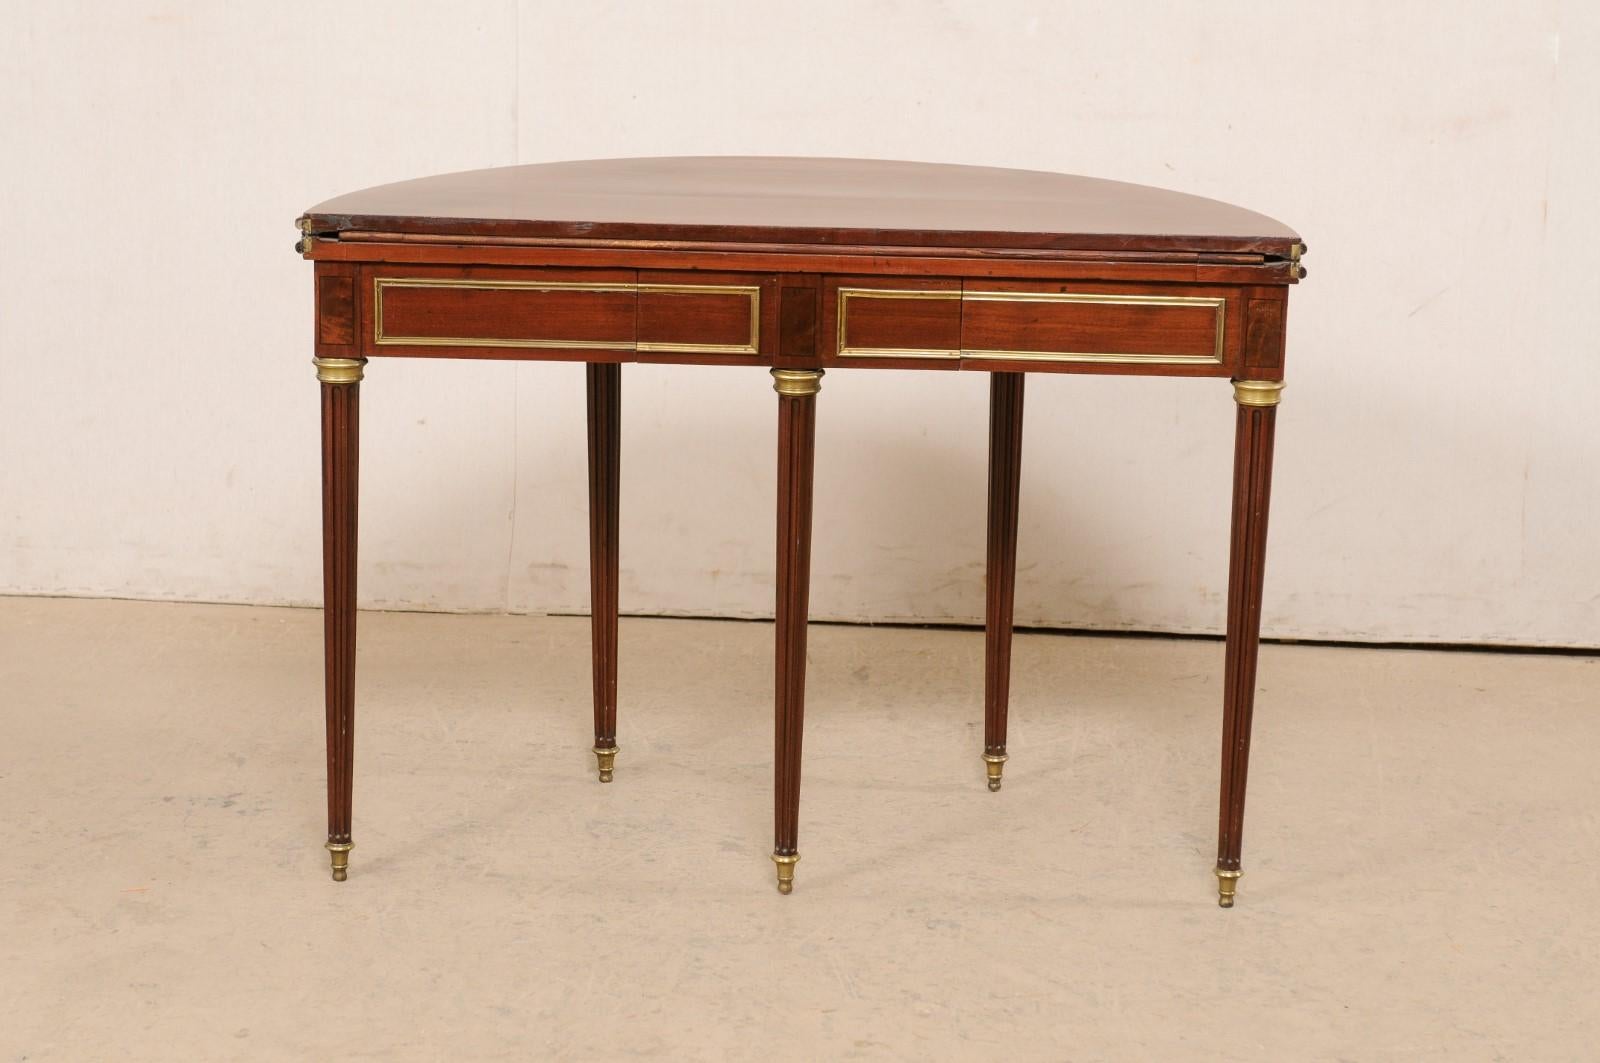  Elegant French Neoclassical Demi-to-round Table W/ Brass Accents, 19th C.  For Sale 8